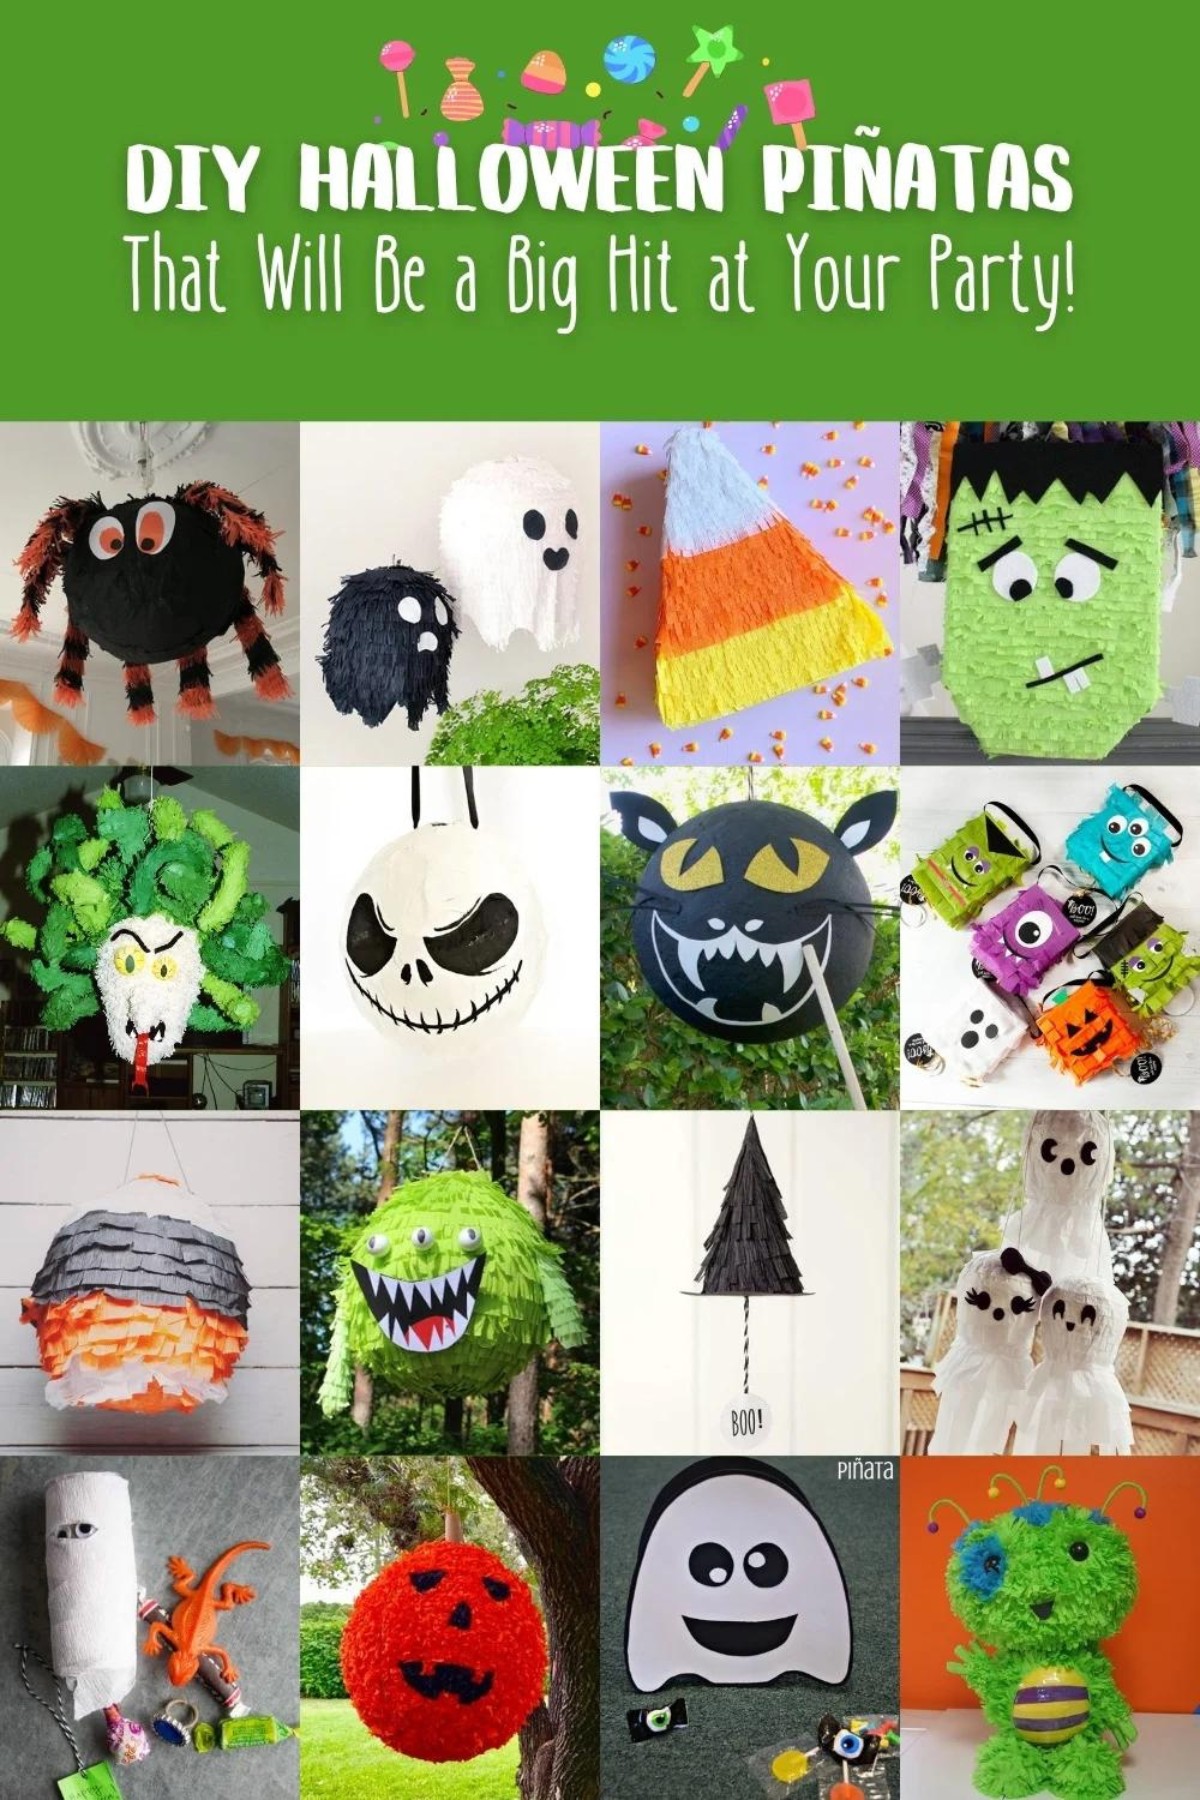 DIY Halloween Pinatas for Your Party